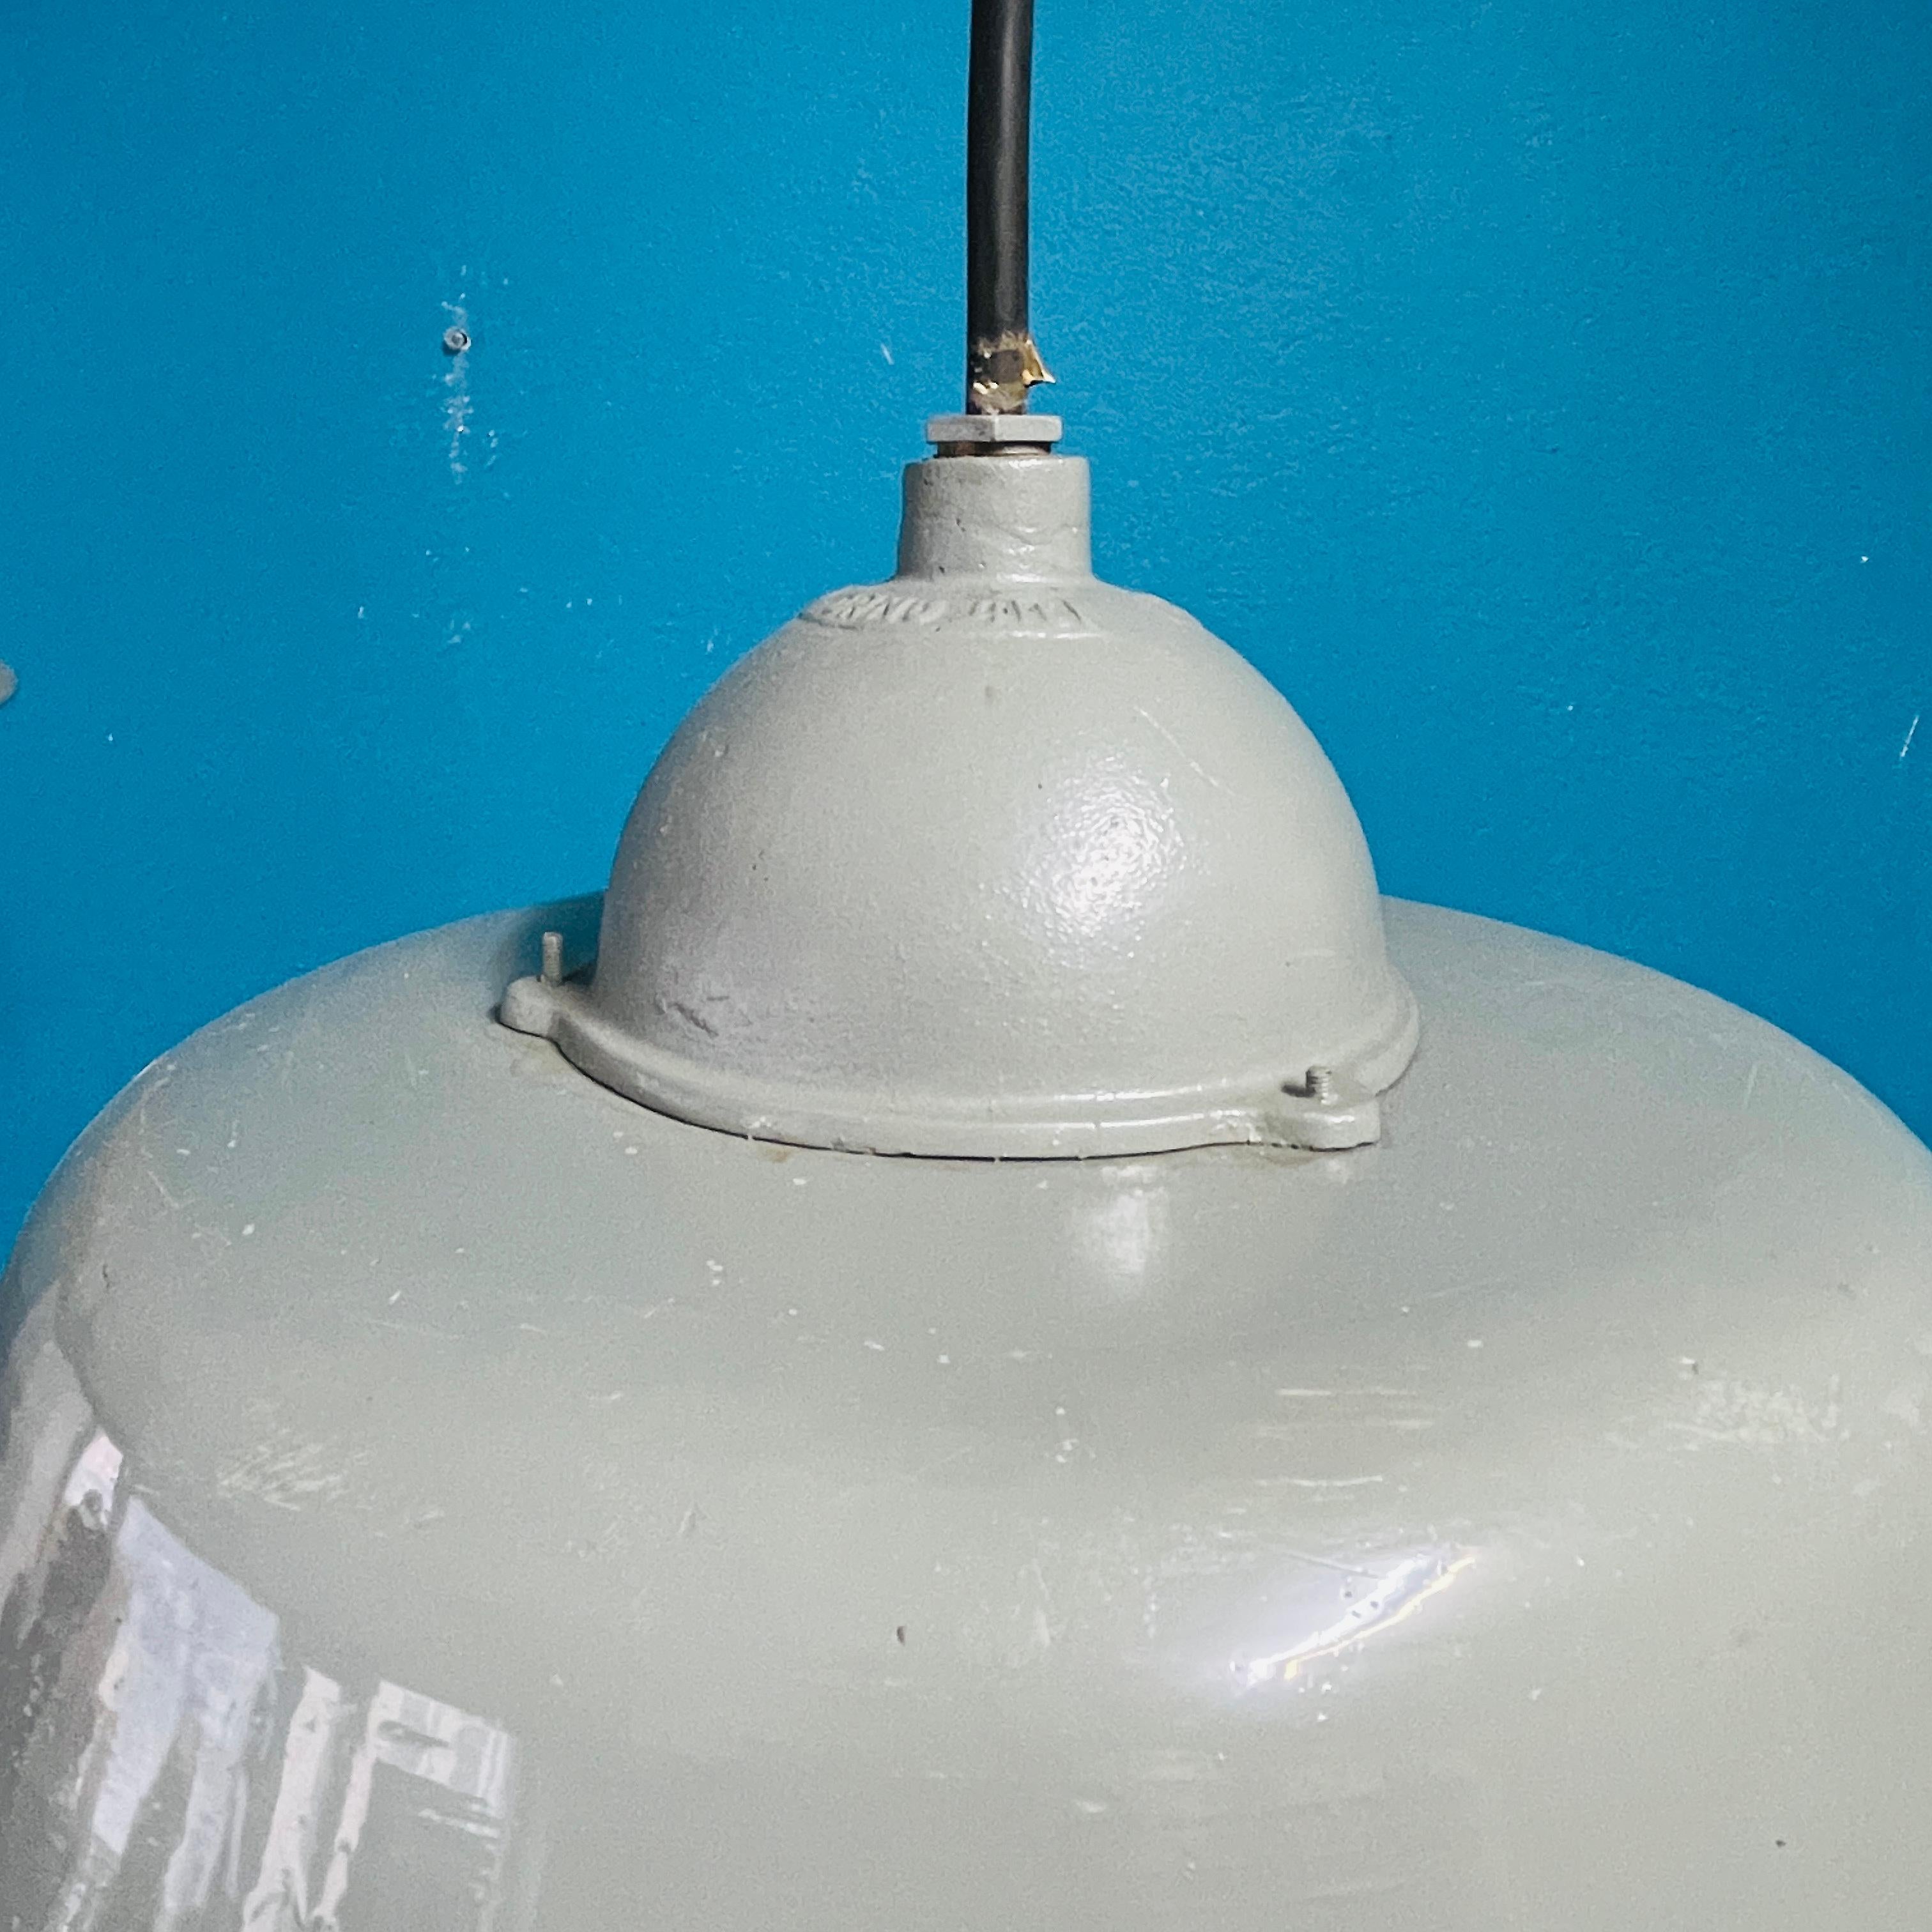 Pair of Vintage Industrial Pendant Lamps, Manufactured by Orno Finland For Sale 1